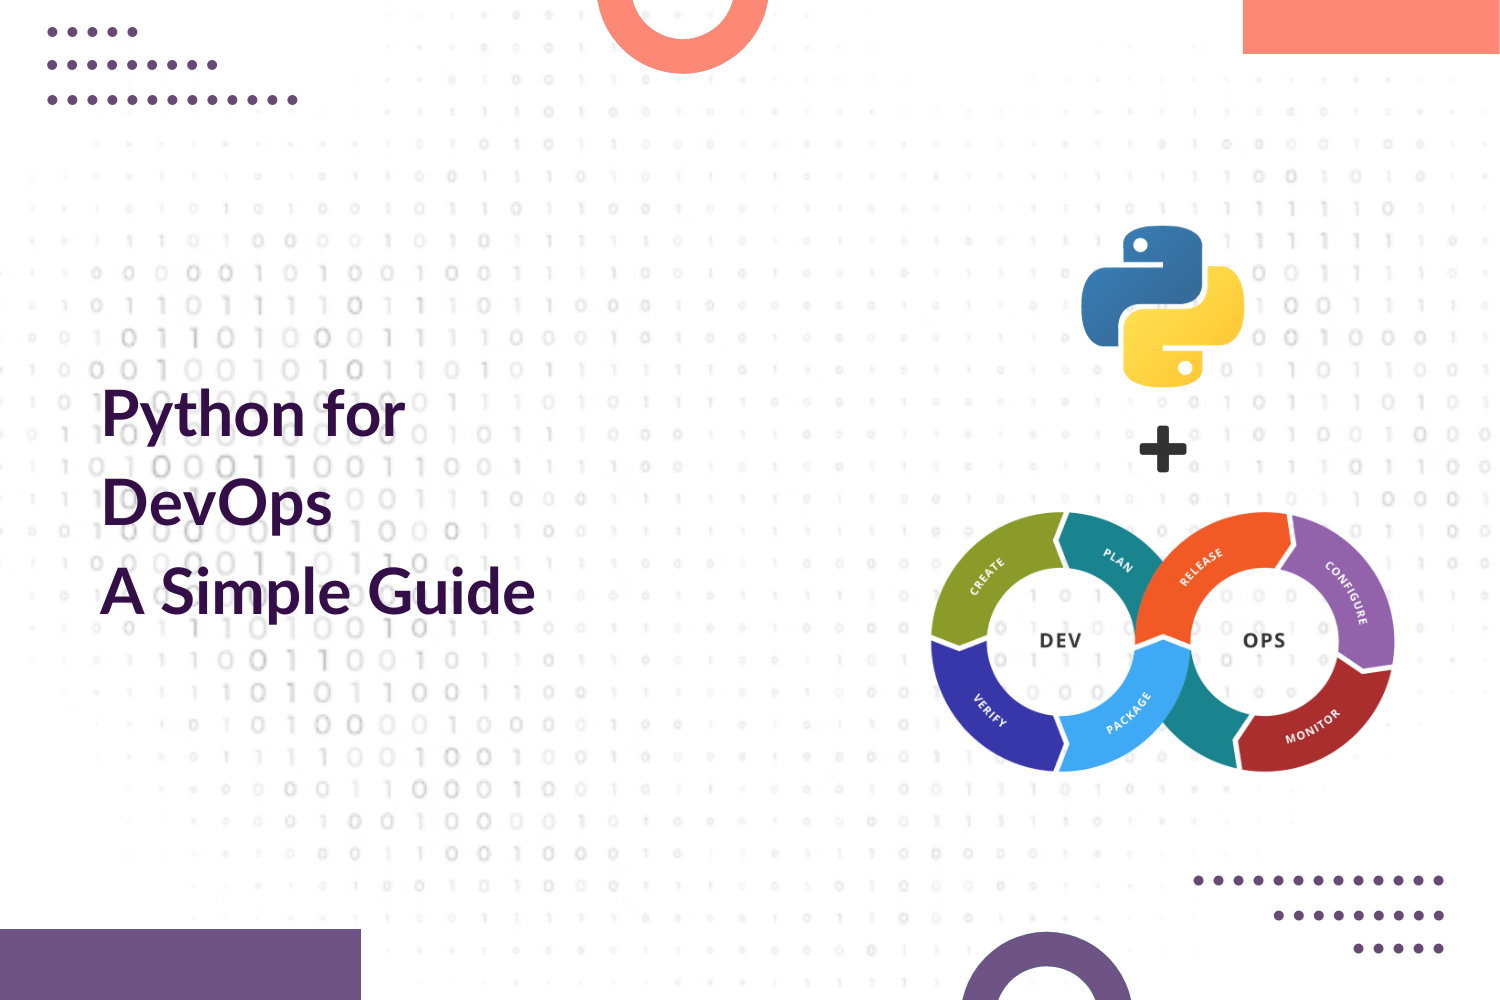 Python for DevOps A Simple Guide